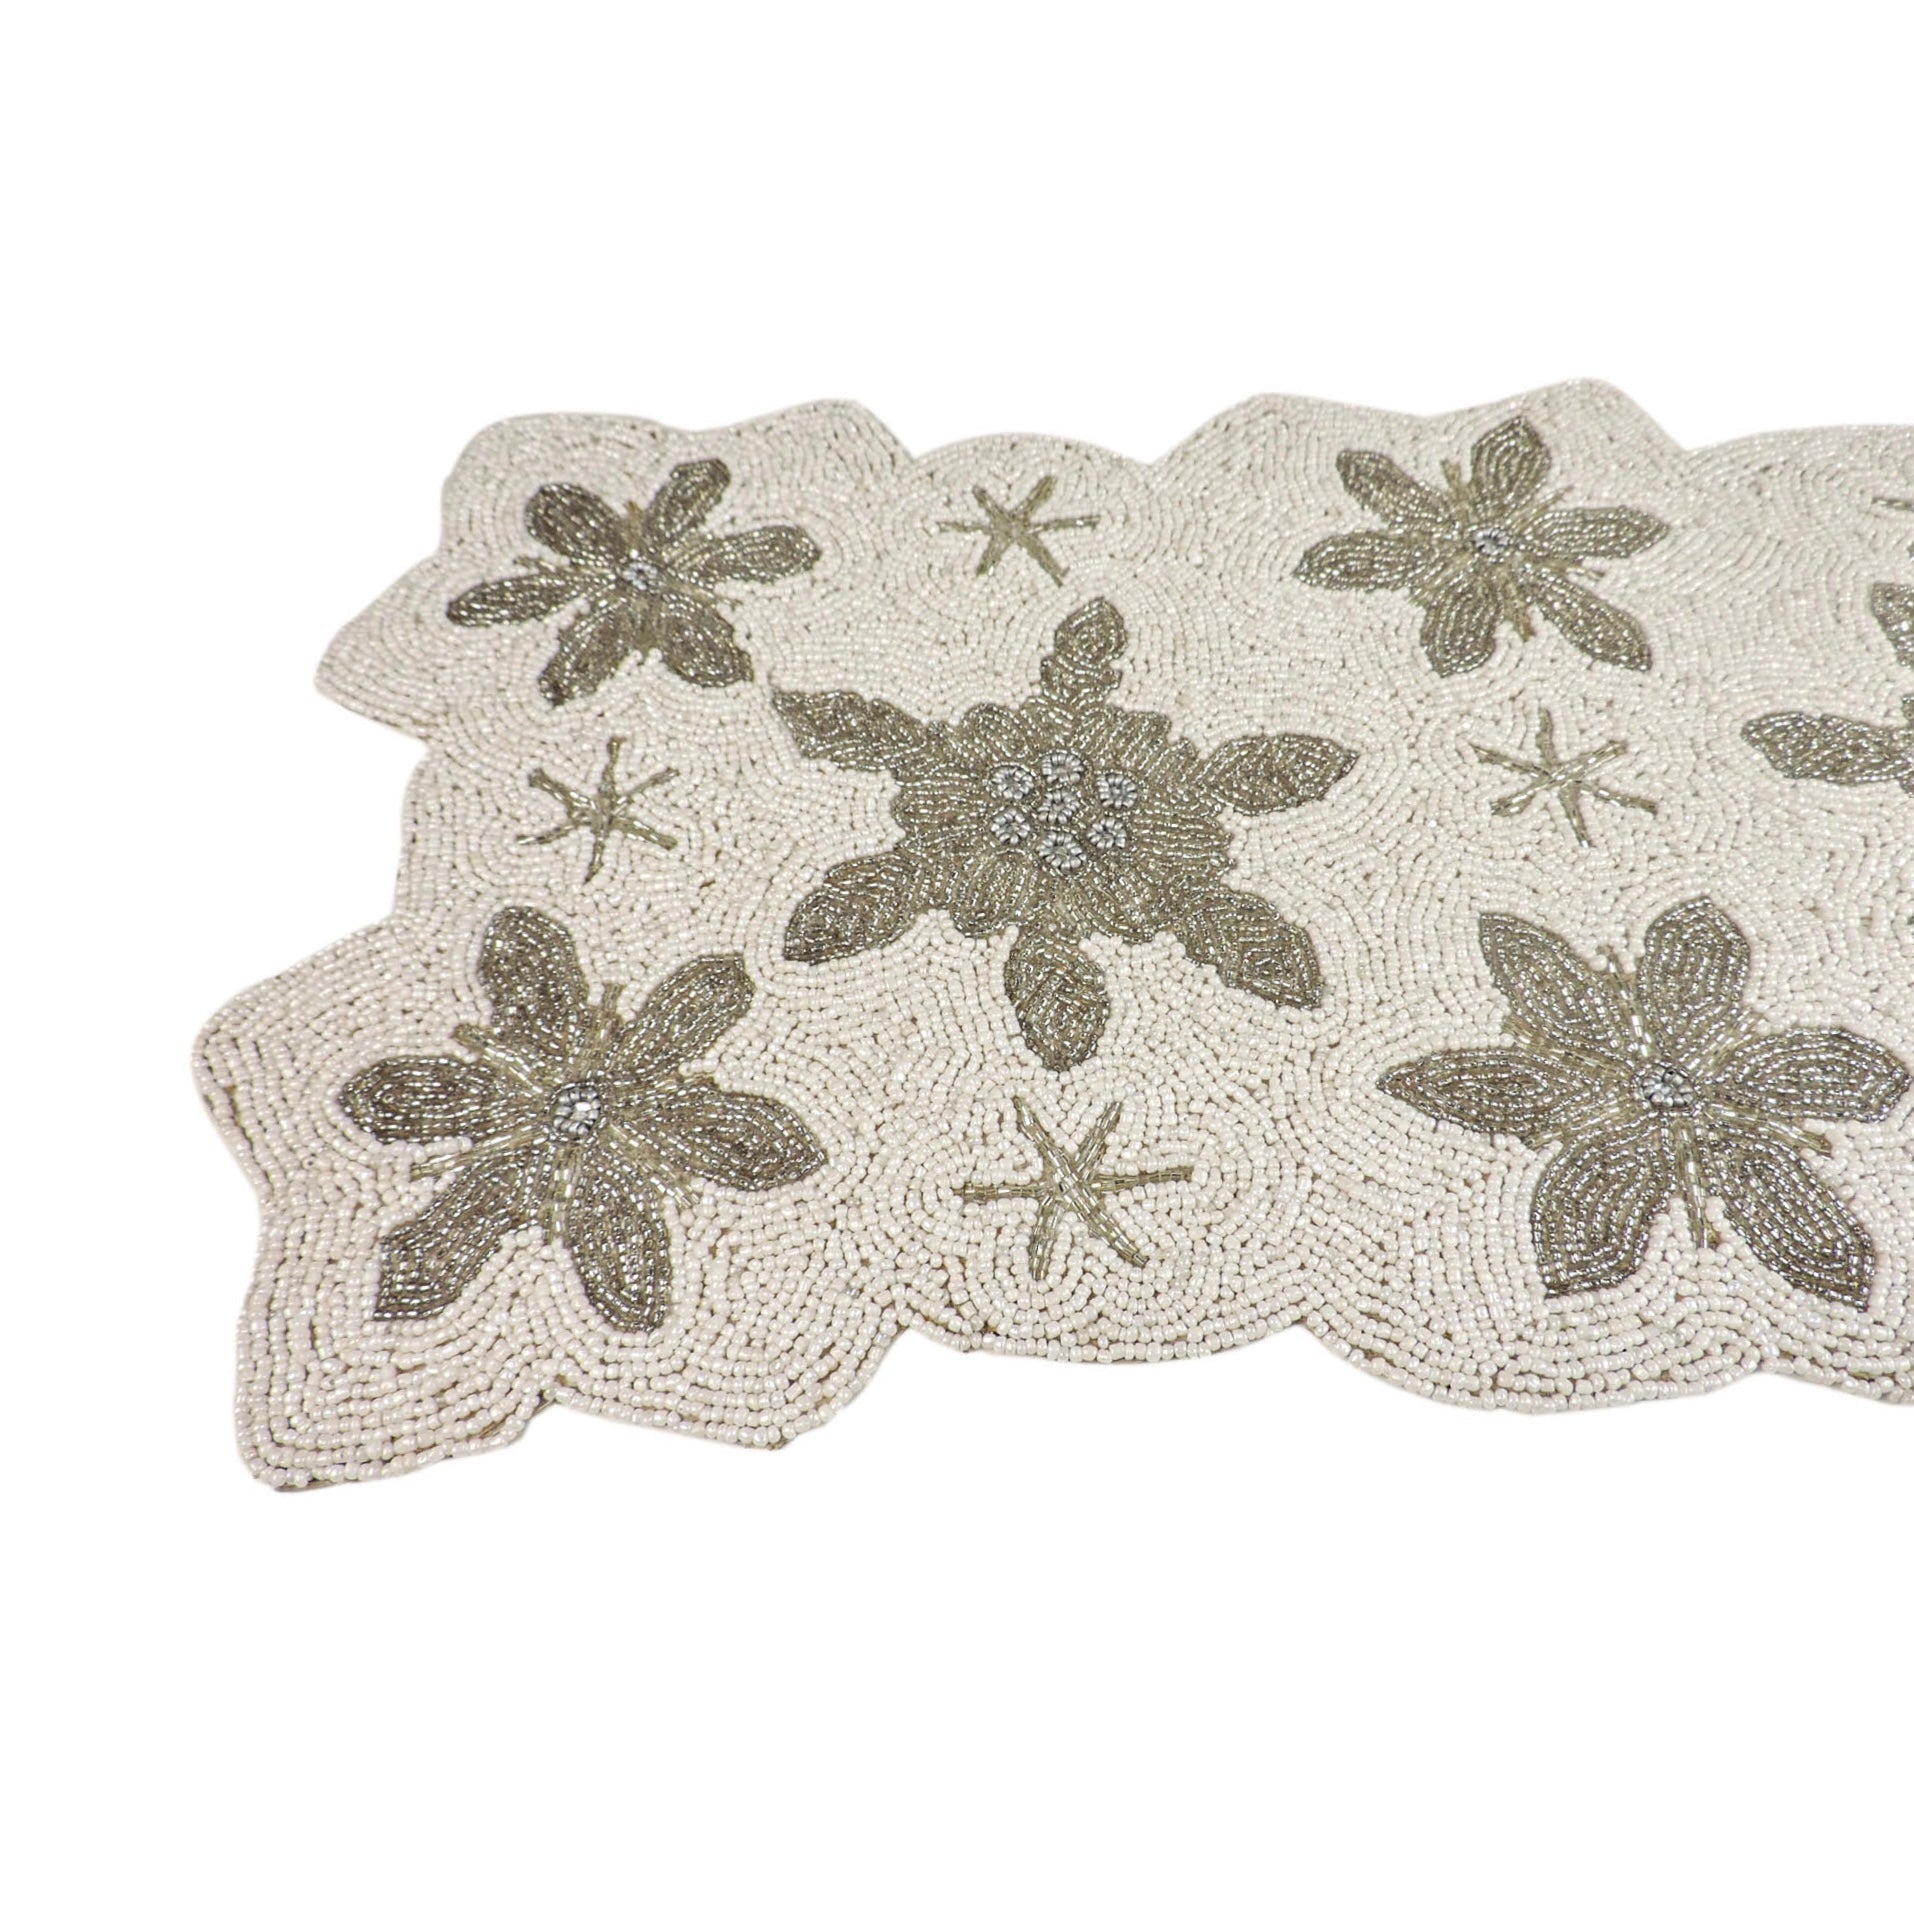 Let it Snow Bead Embroidered Table Runner in White & Silver